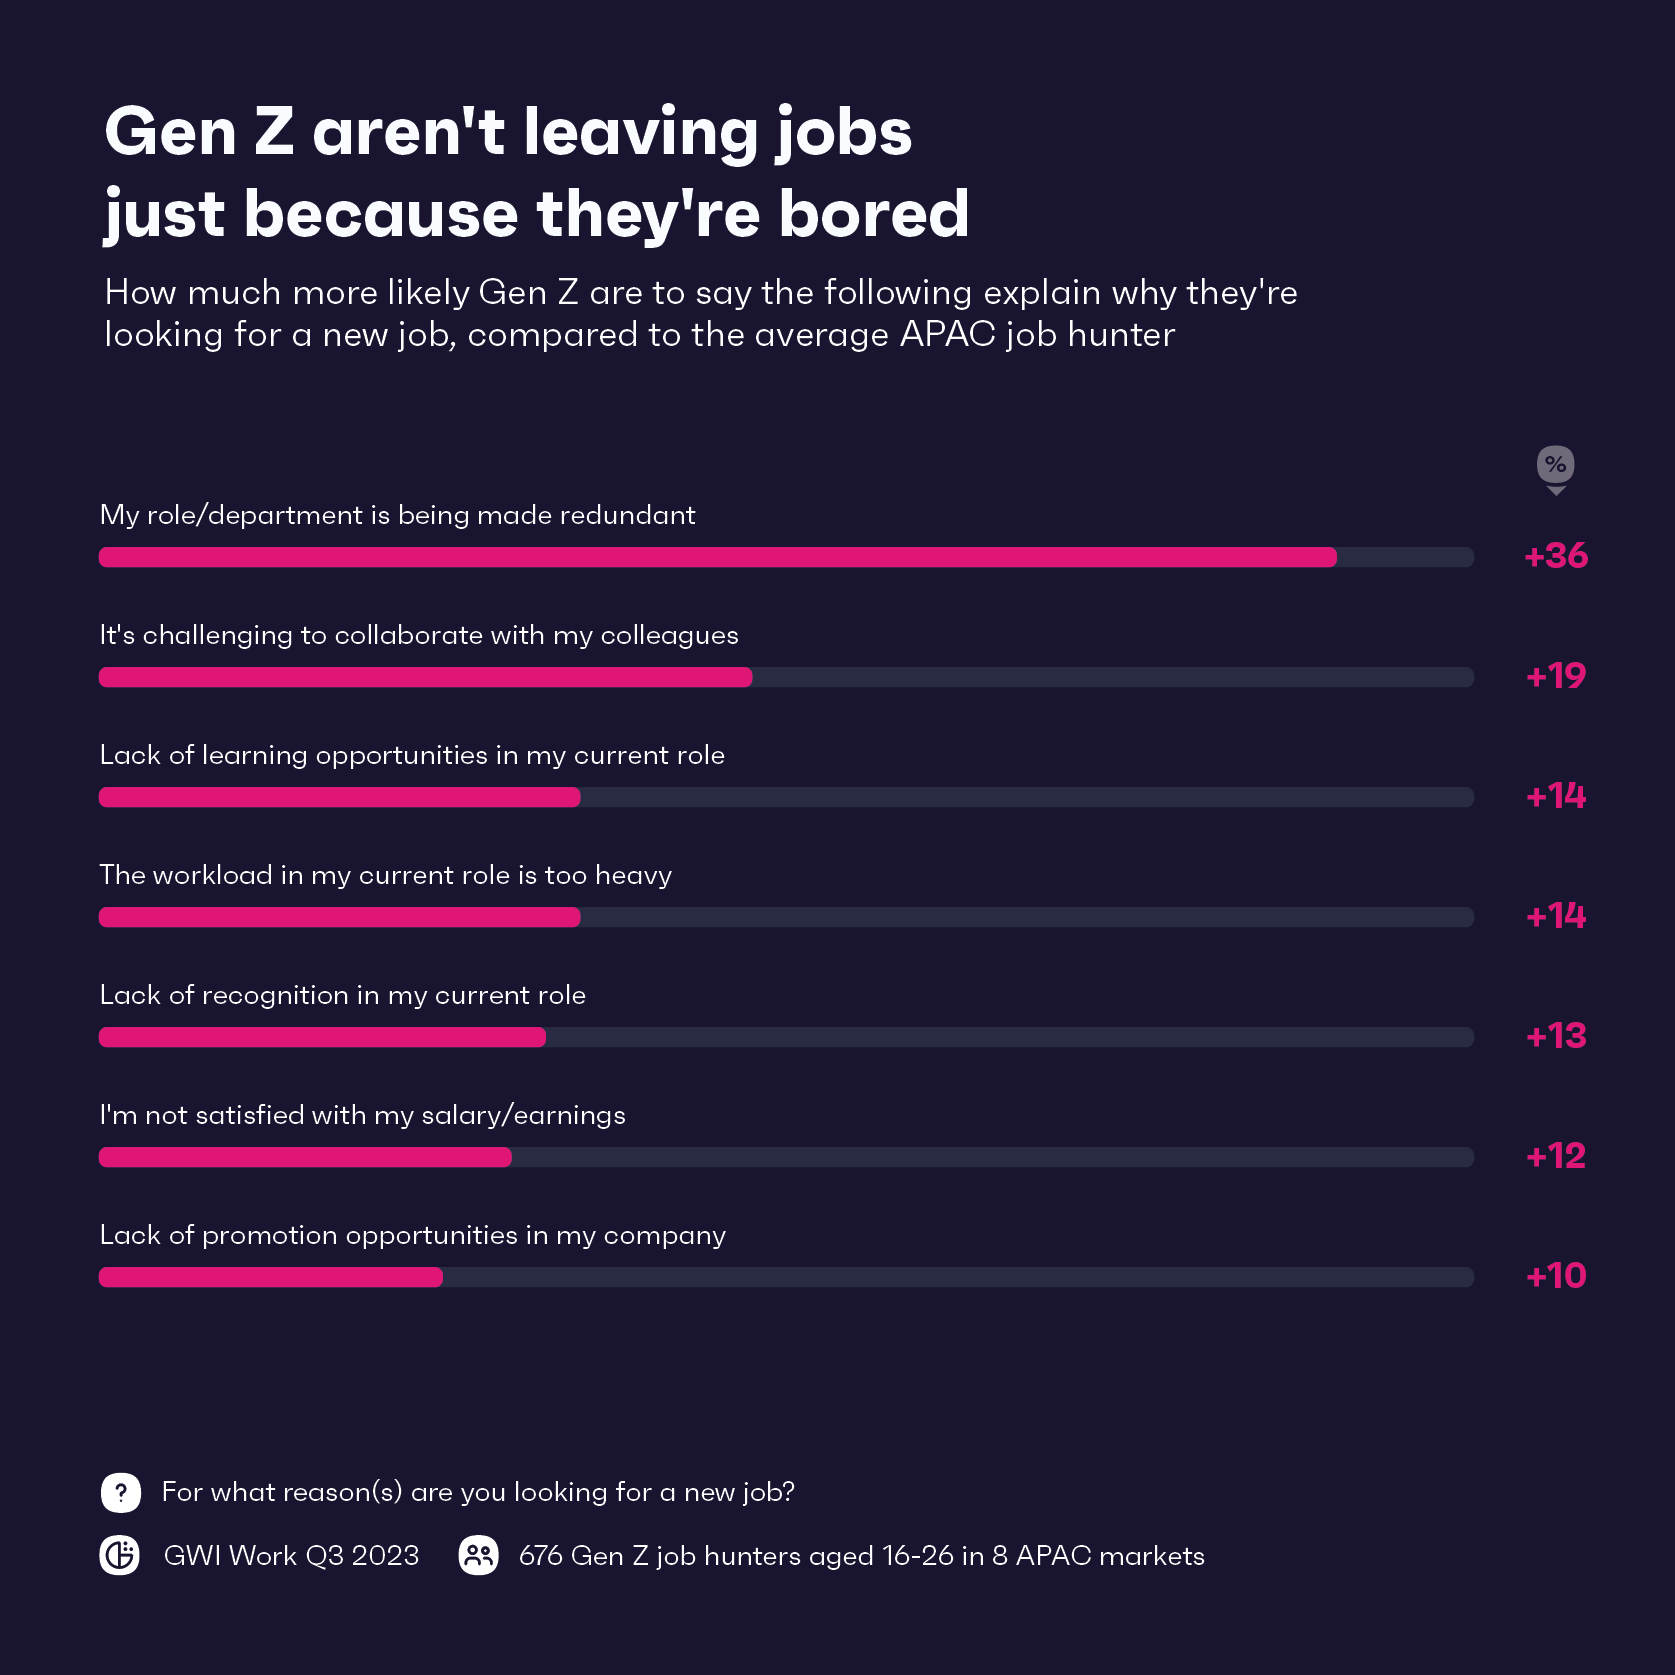 Chart showing why Gen Z workers are leaving their current roles